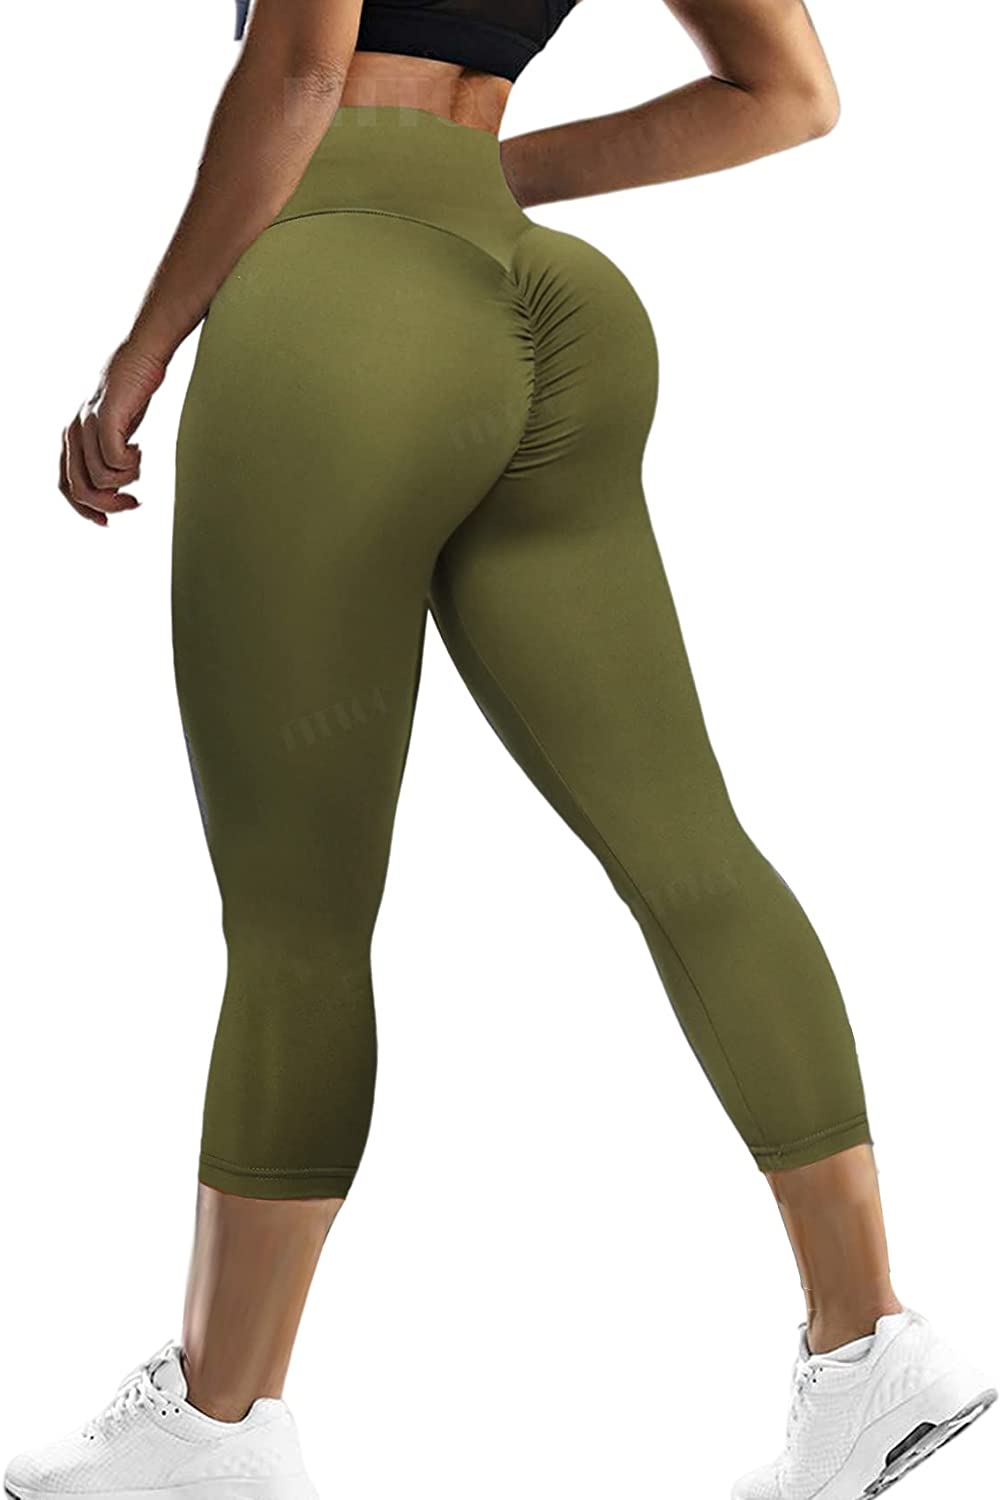 Aayomet Women Full Length Workout Running Sports Tights Butt Lift Yoga  Pants Style Printed Leggings High Tall (Army Green, XL)